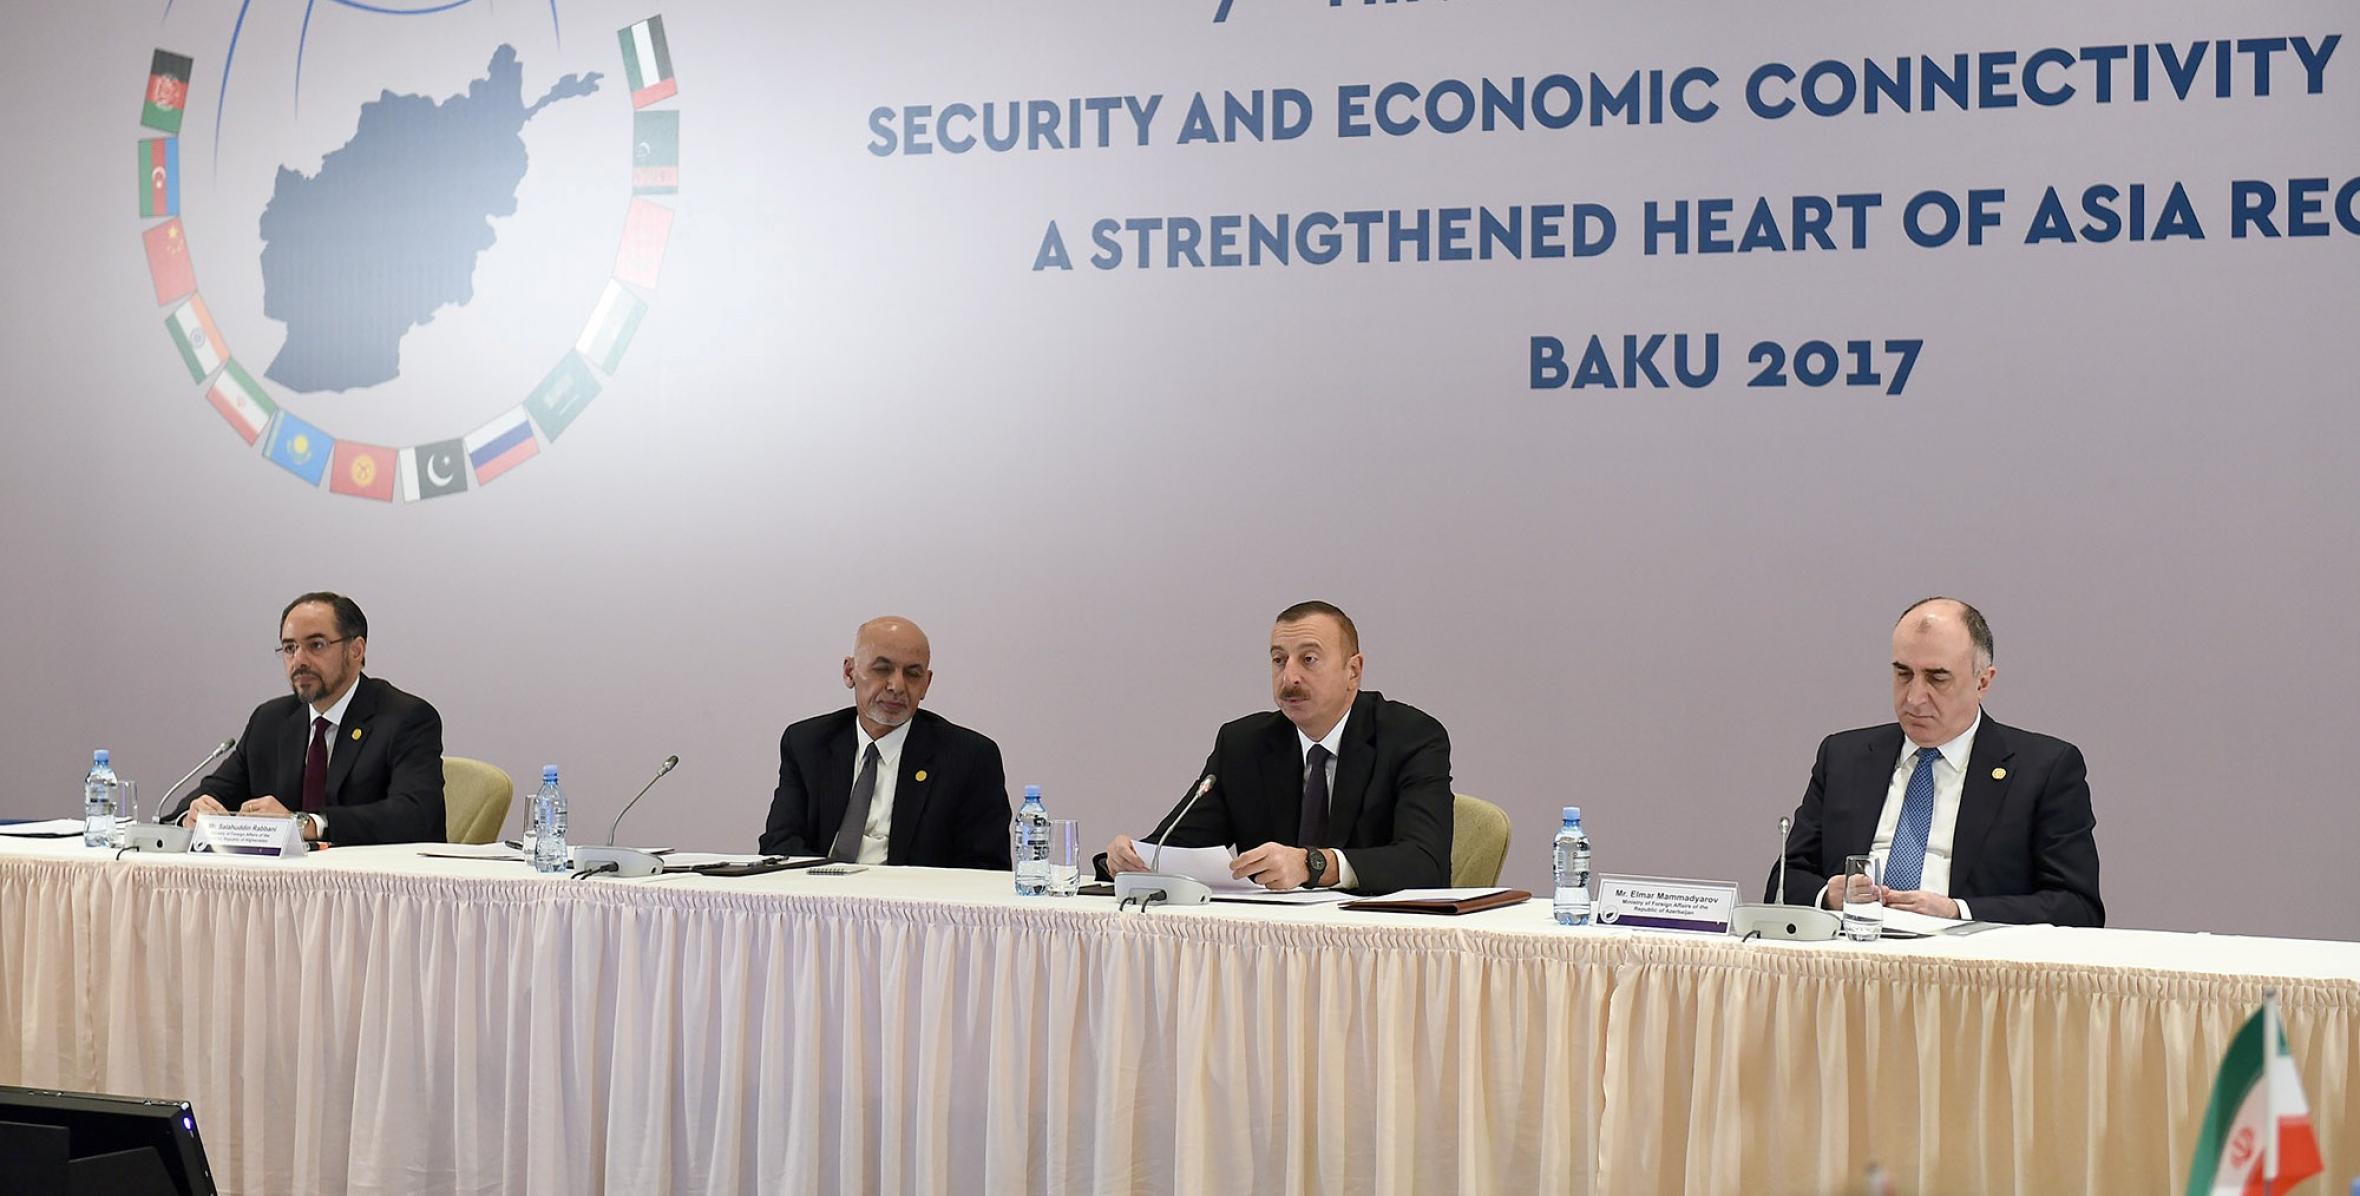 Ilham Aliyev and President of the Islamic Republic of Afghanistan Mohammad Ashraf Ghani attended the conference